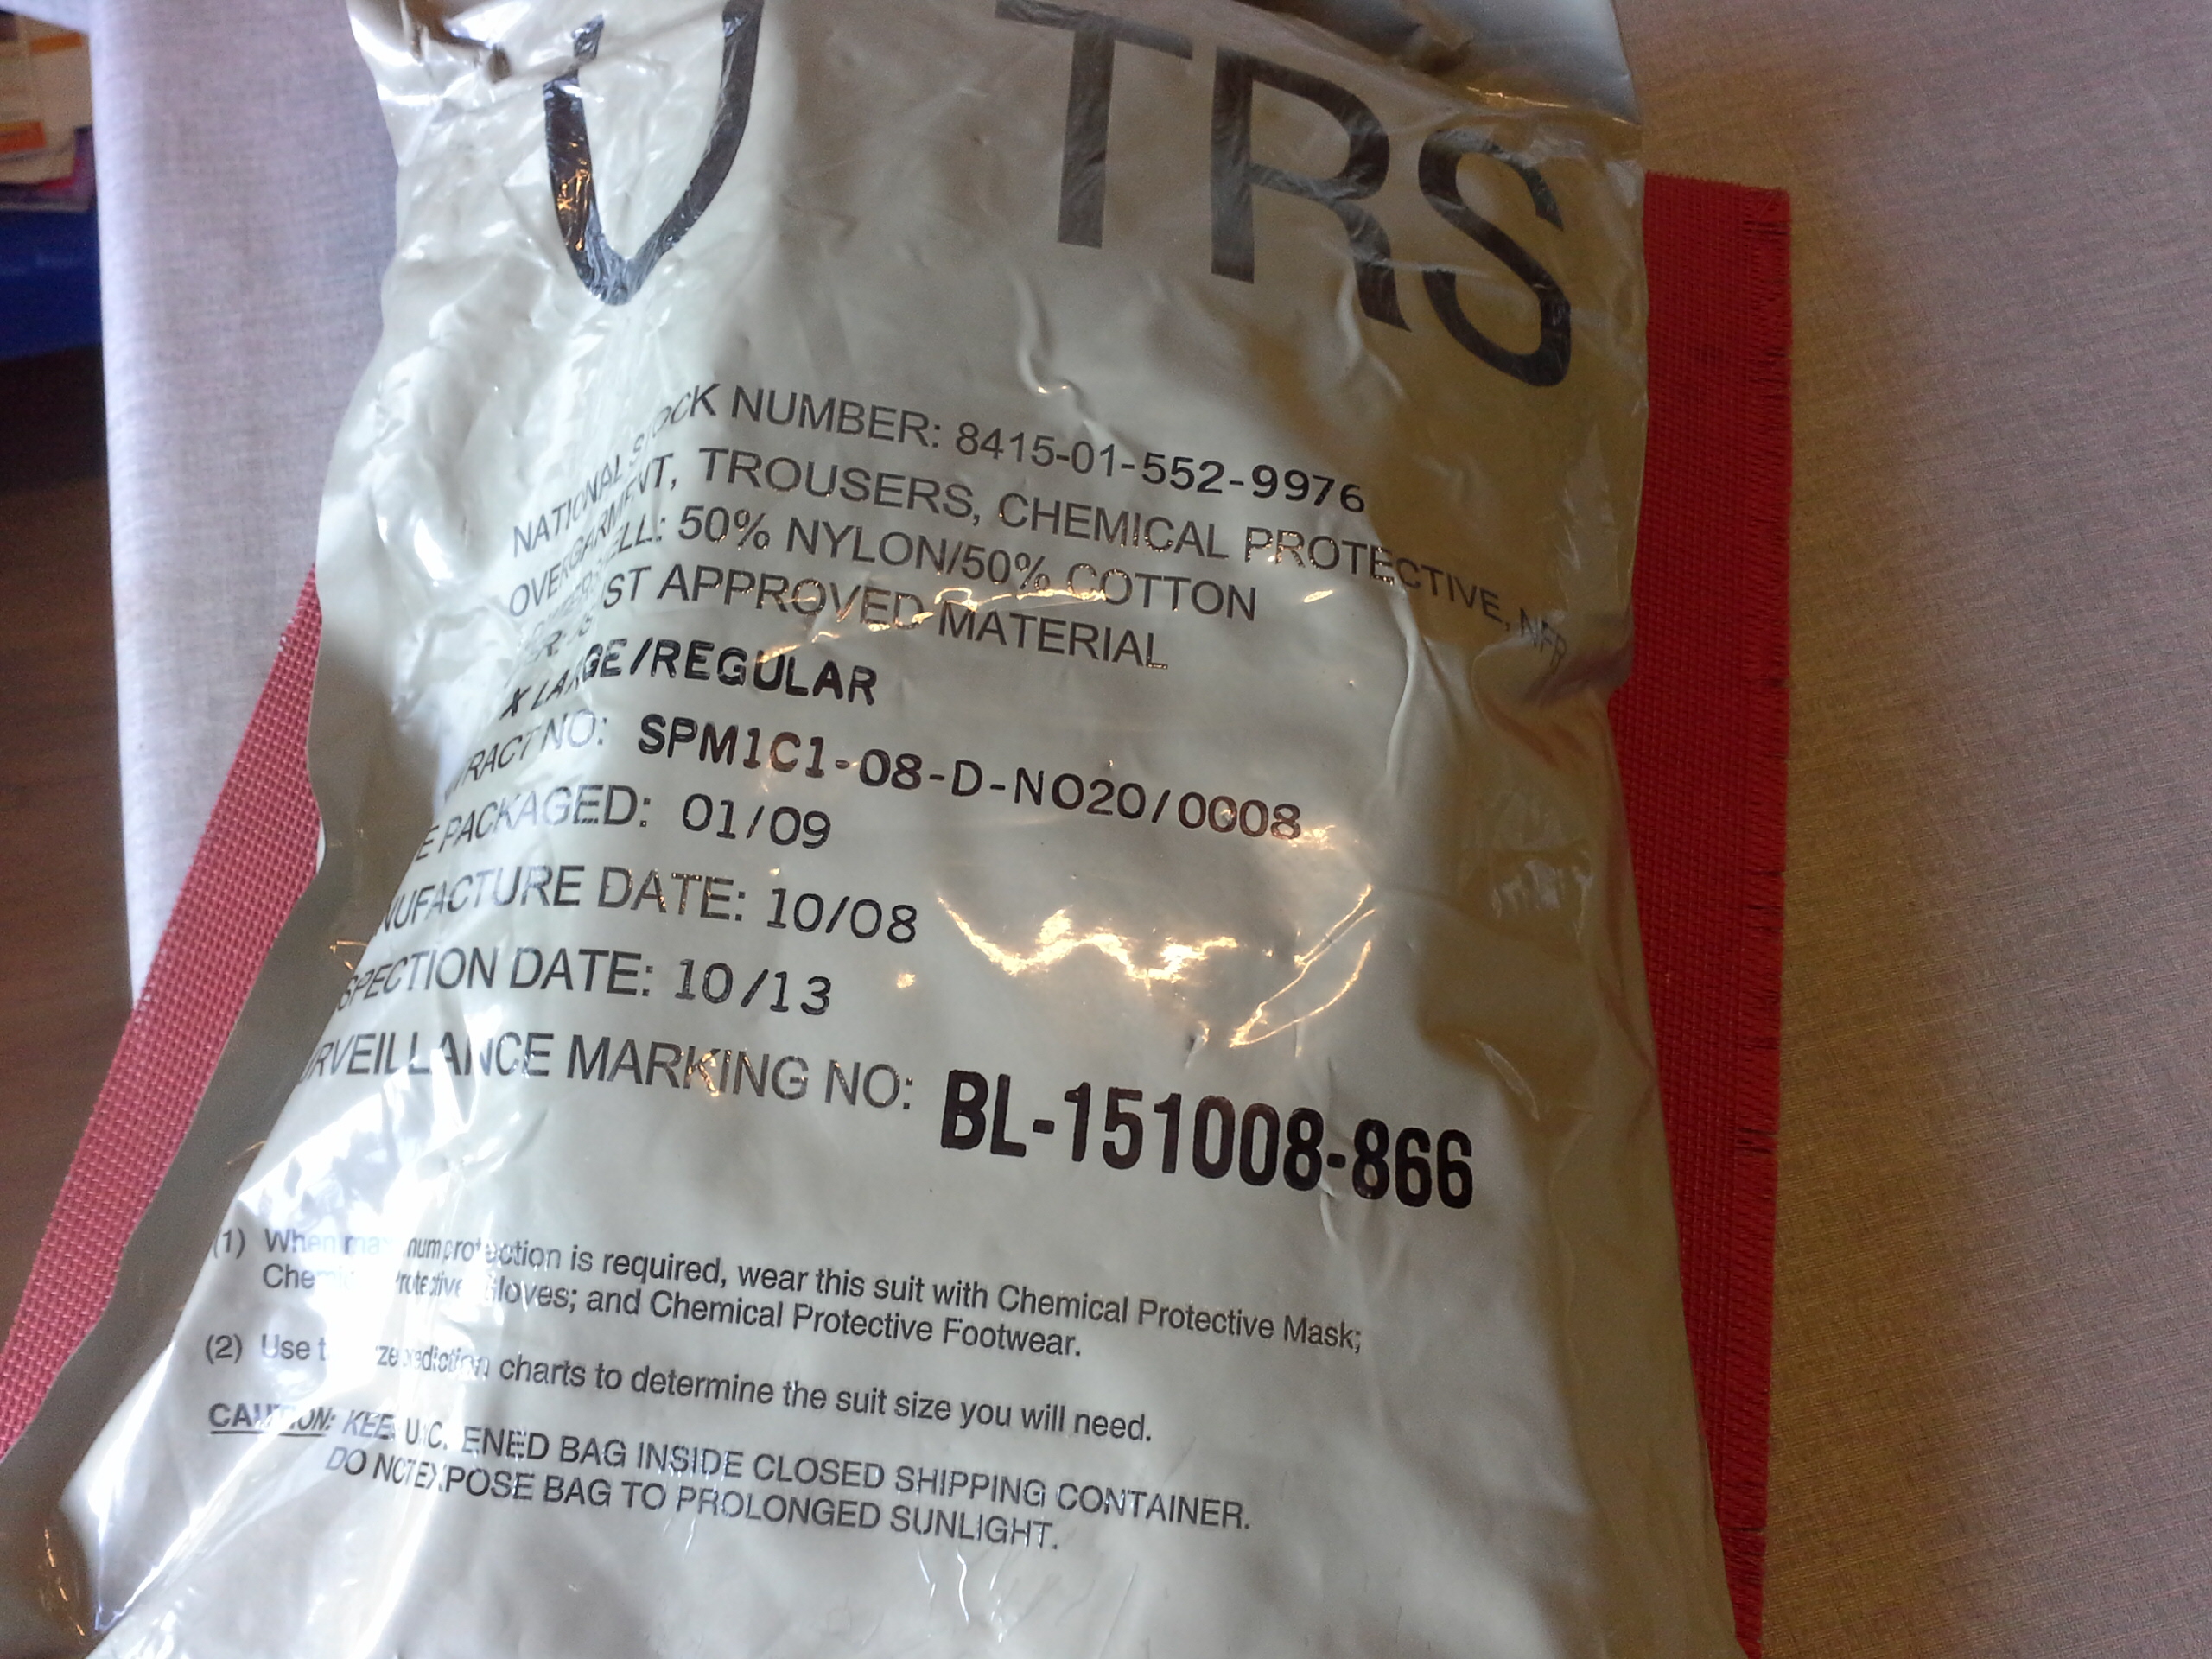 U-TRS, Overgarment,Trousers, Chemical Protective, NFR